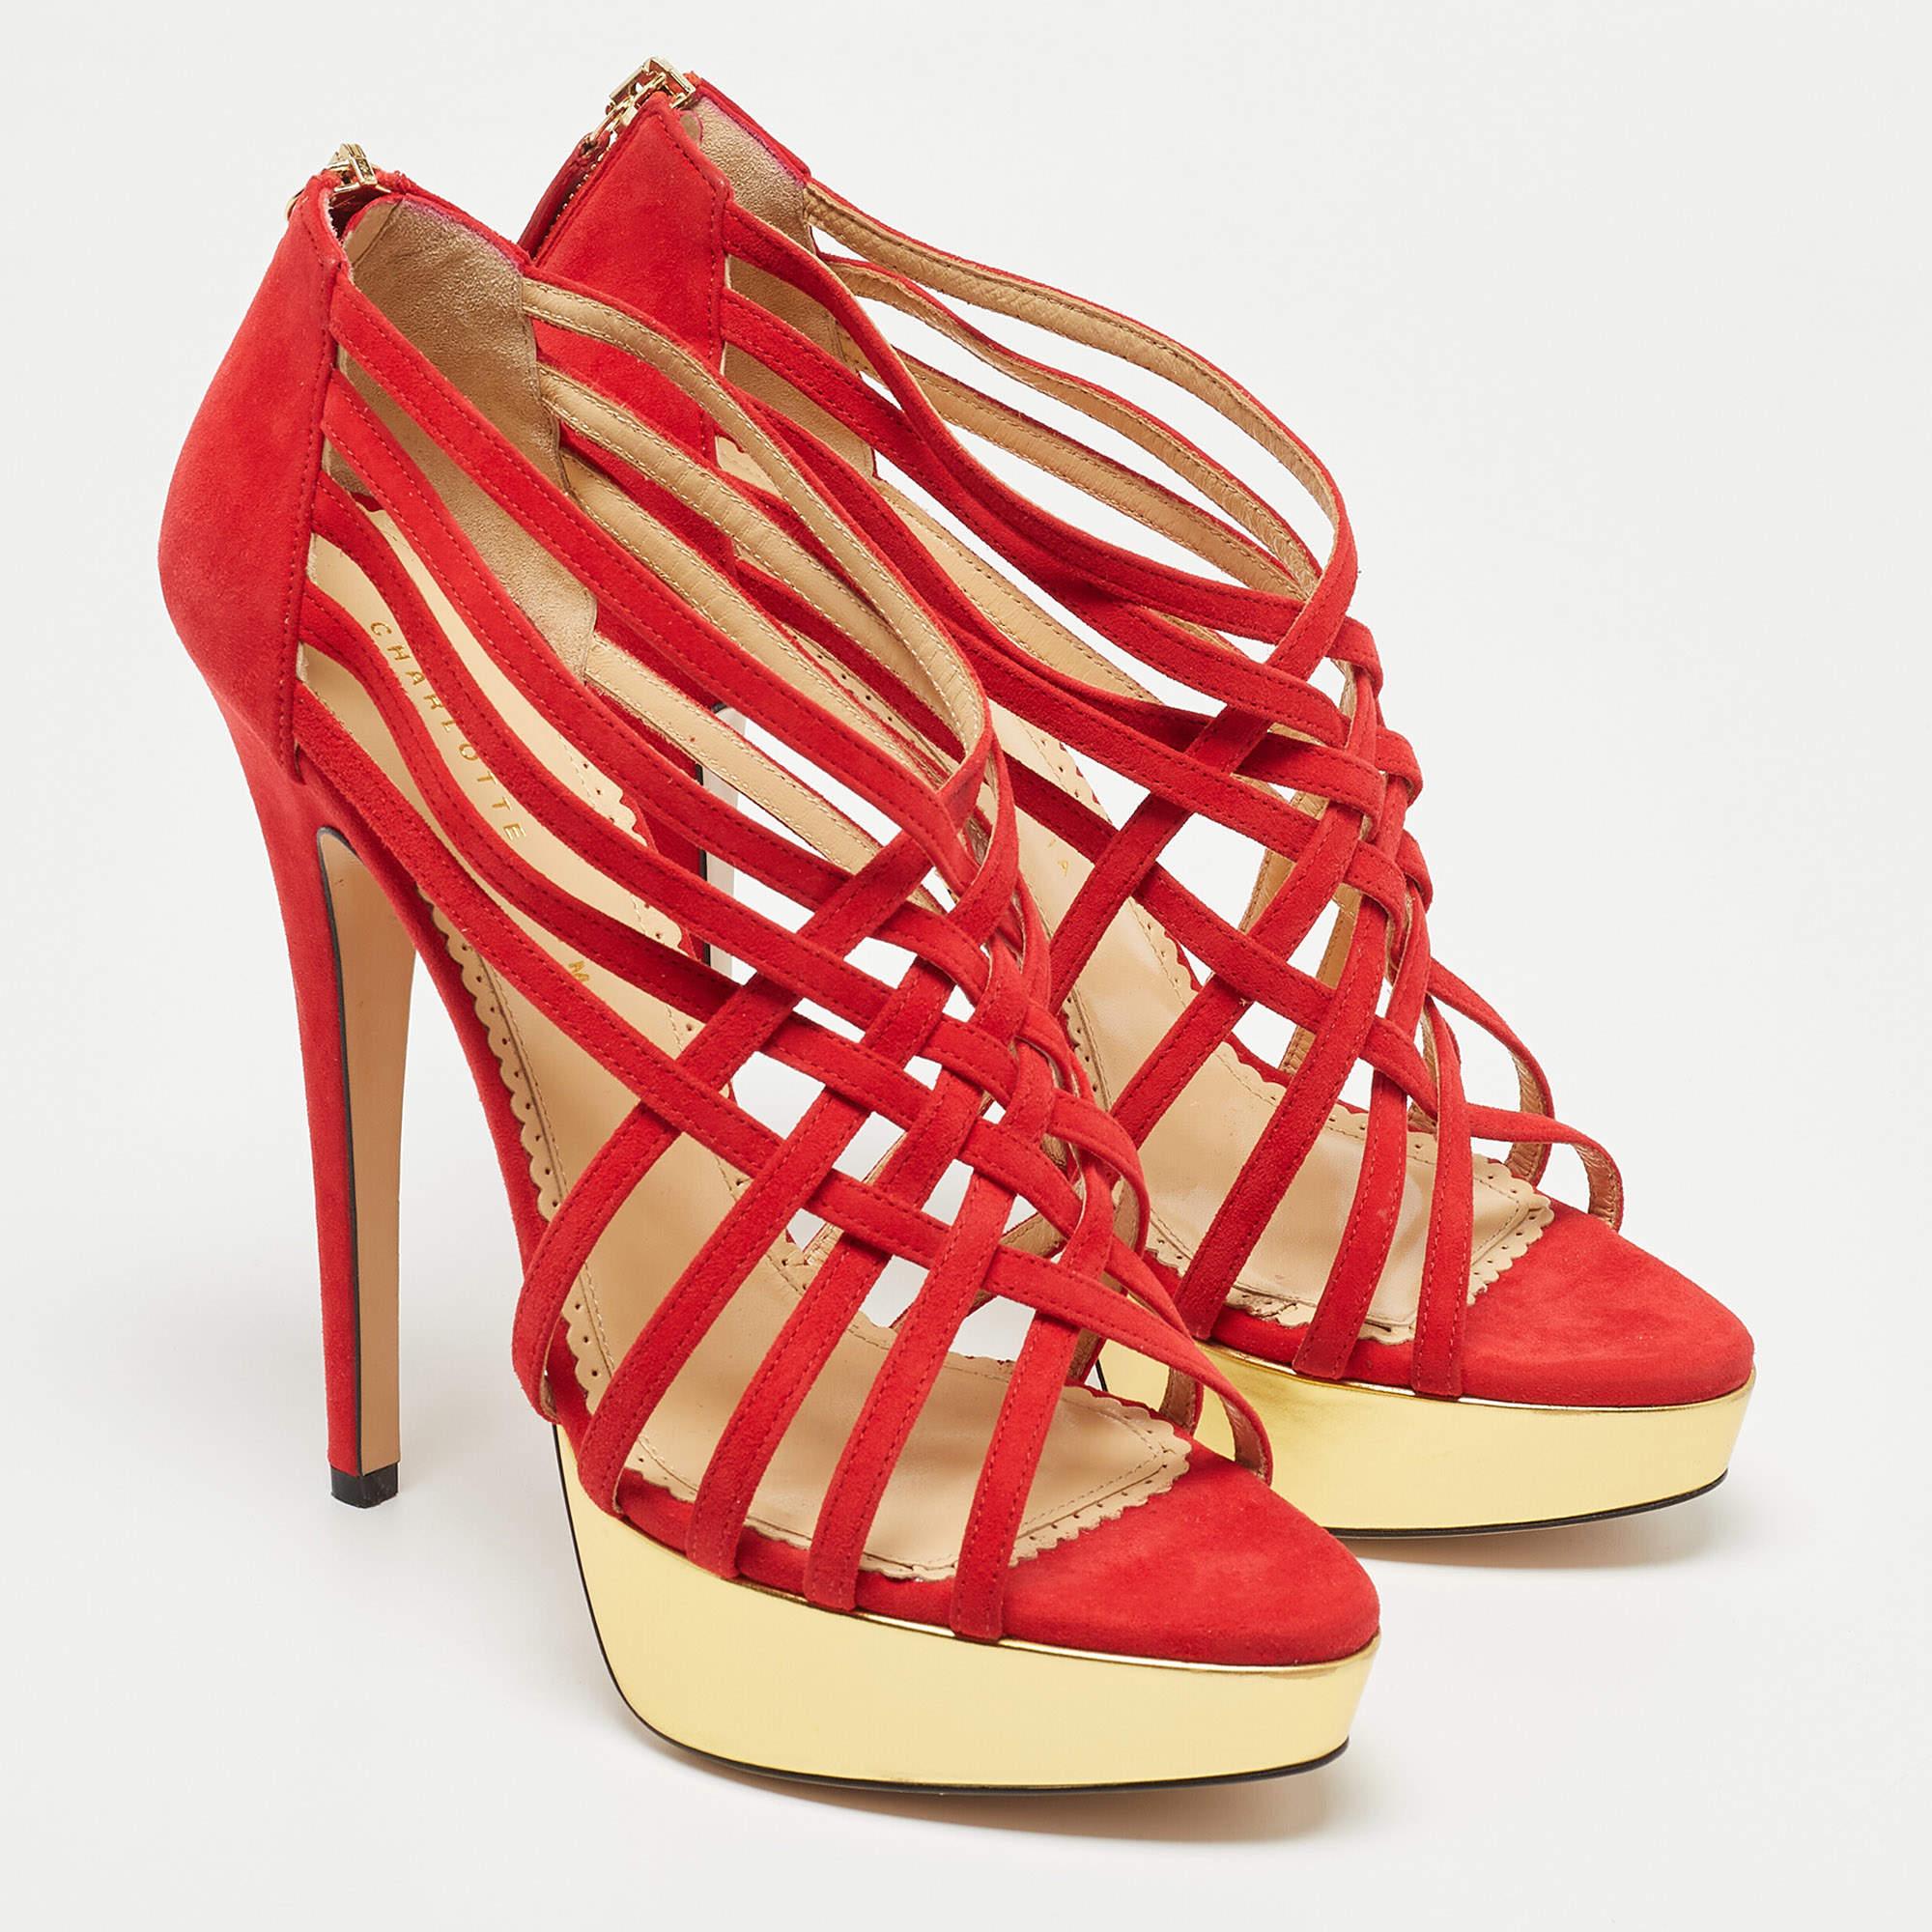 Charlotte Olympia Red Suede Strappy Platform Sandals Size 40 In Excellent Condition For Sale In Dubai, Al Qouz 2